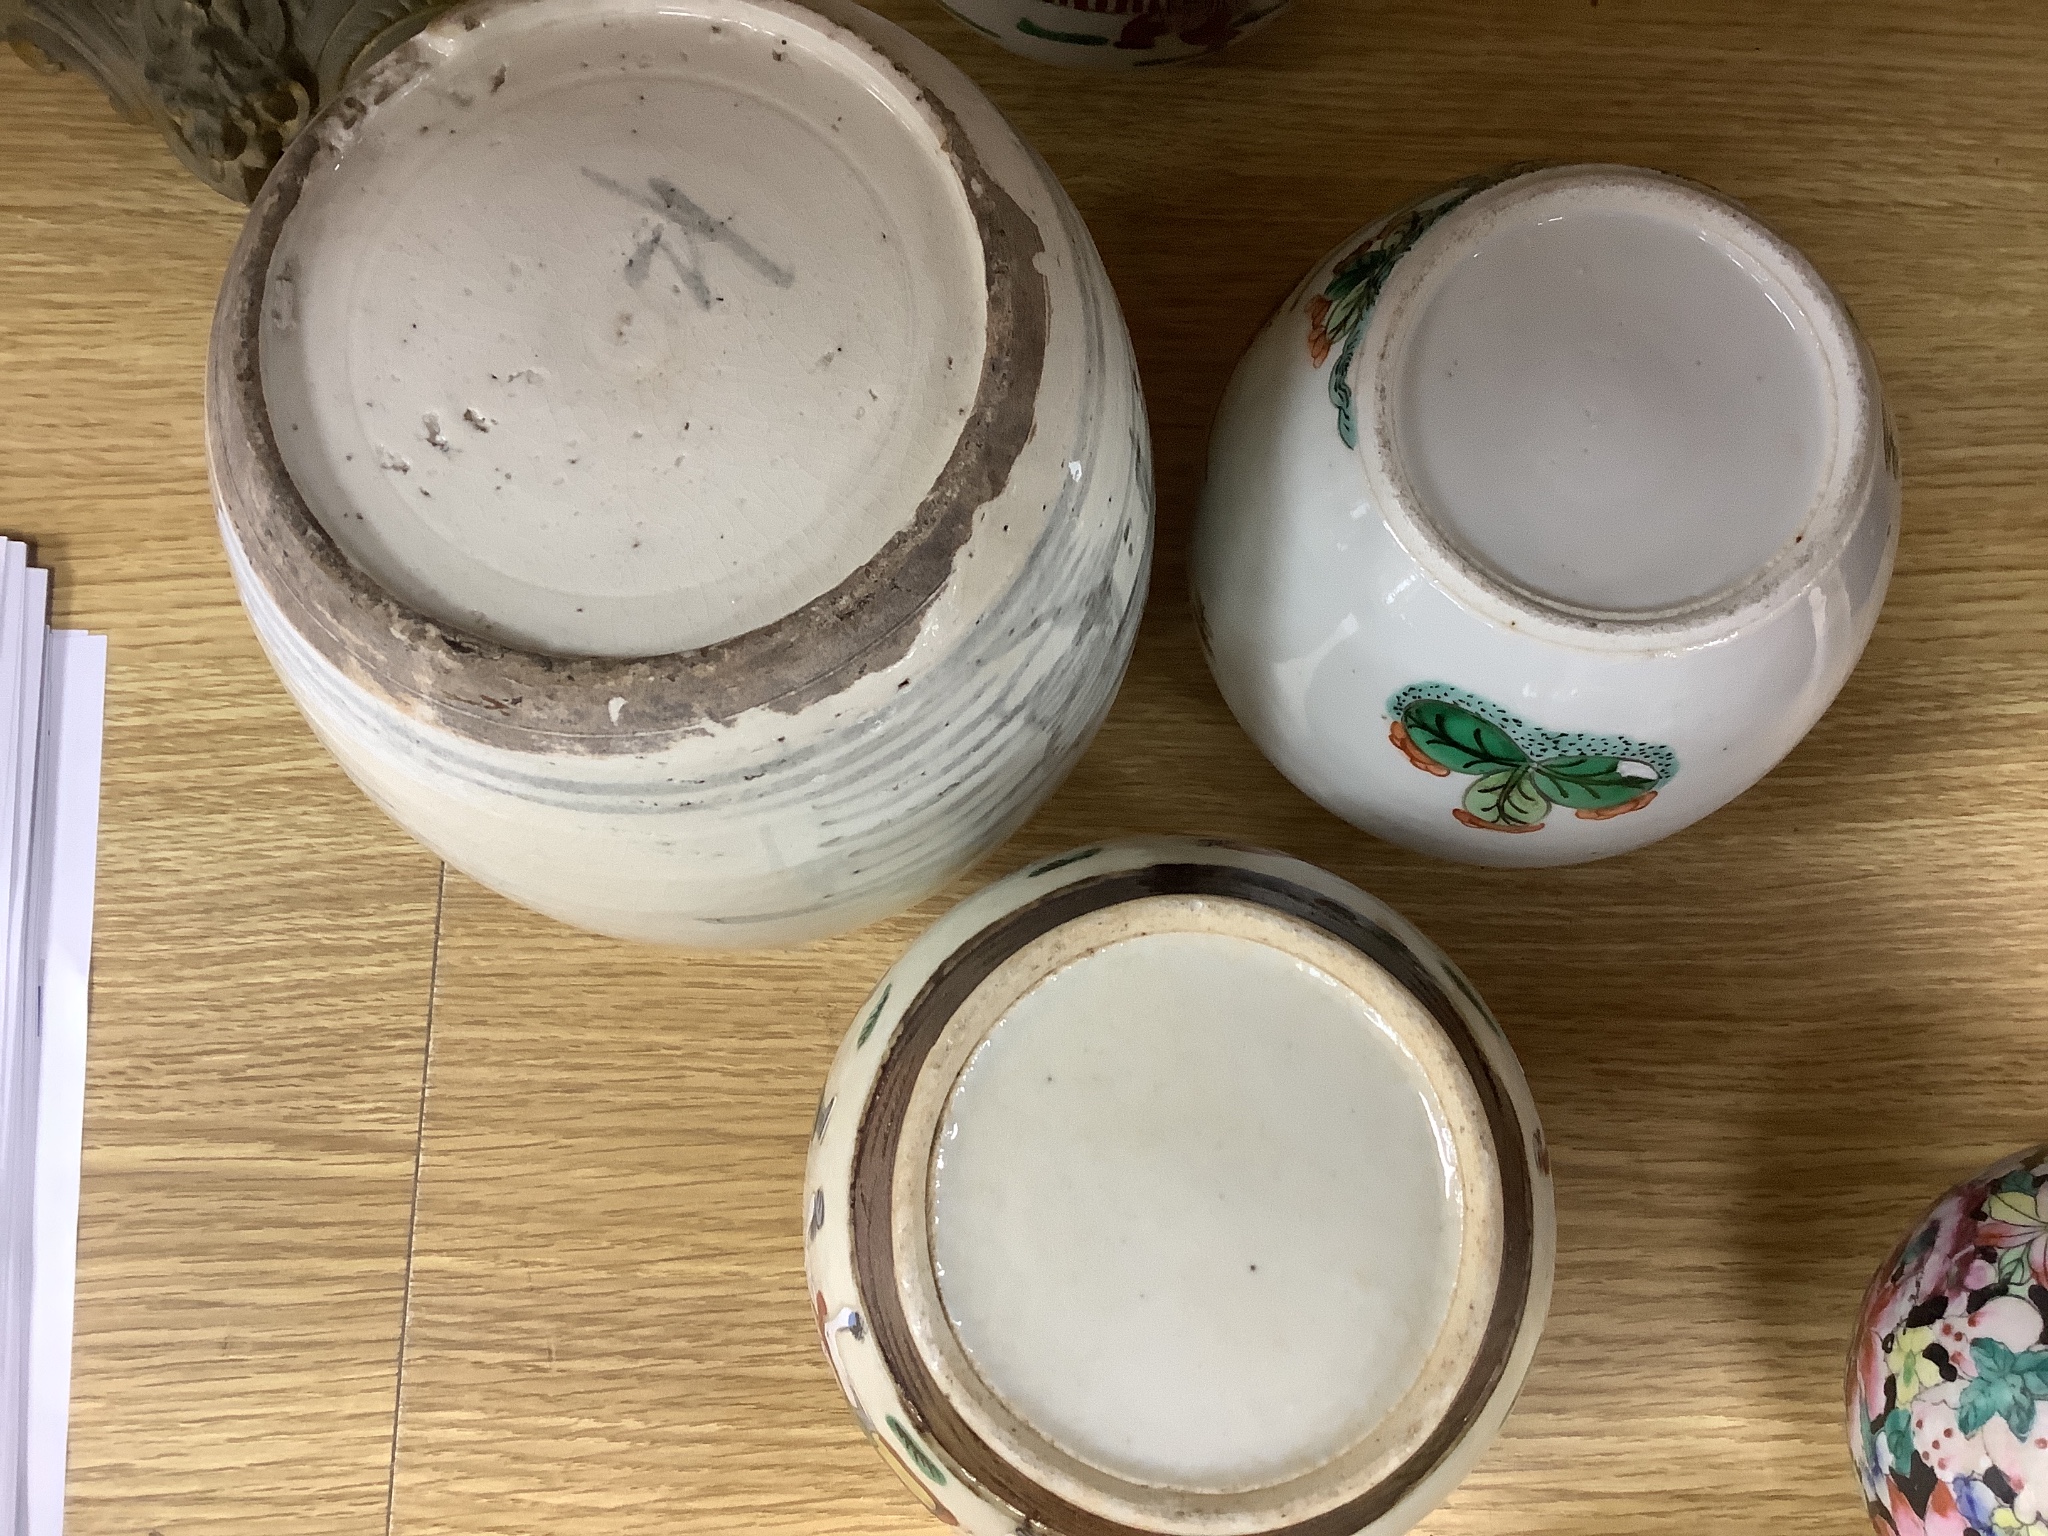 Seven Chinese porcelain or stoneware jars, 19th/20th century